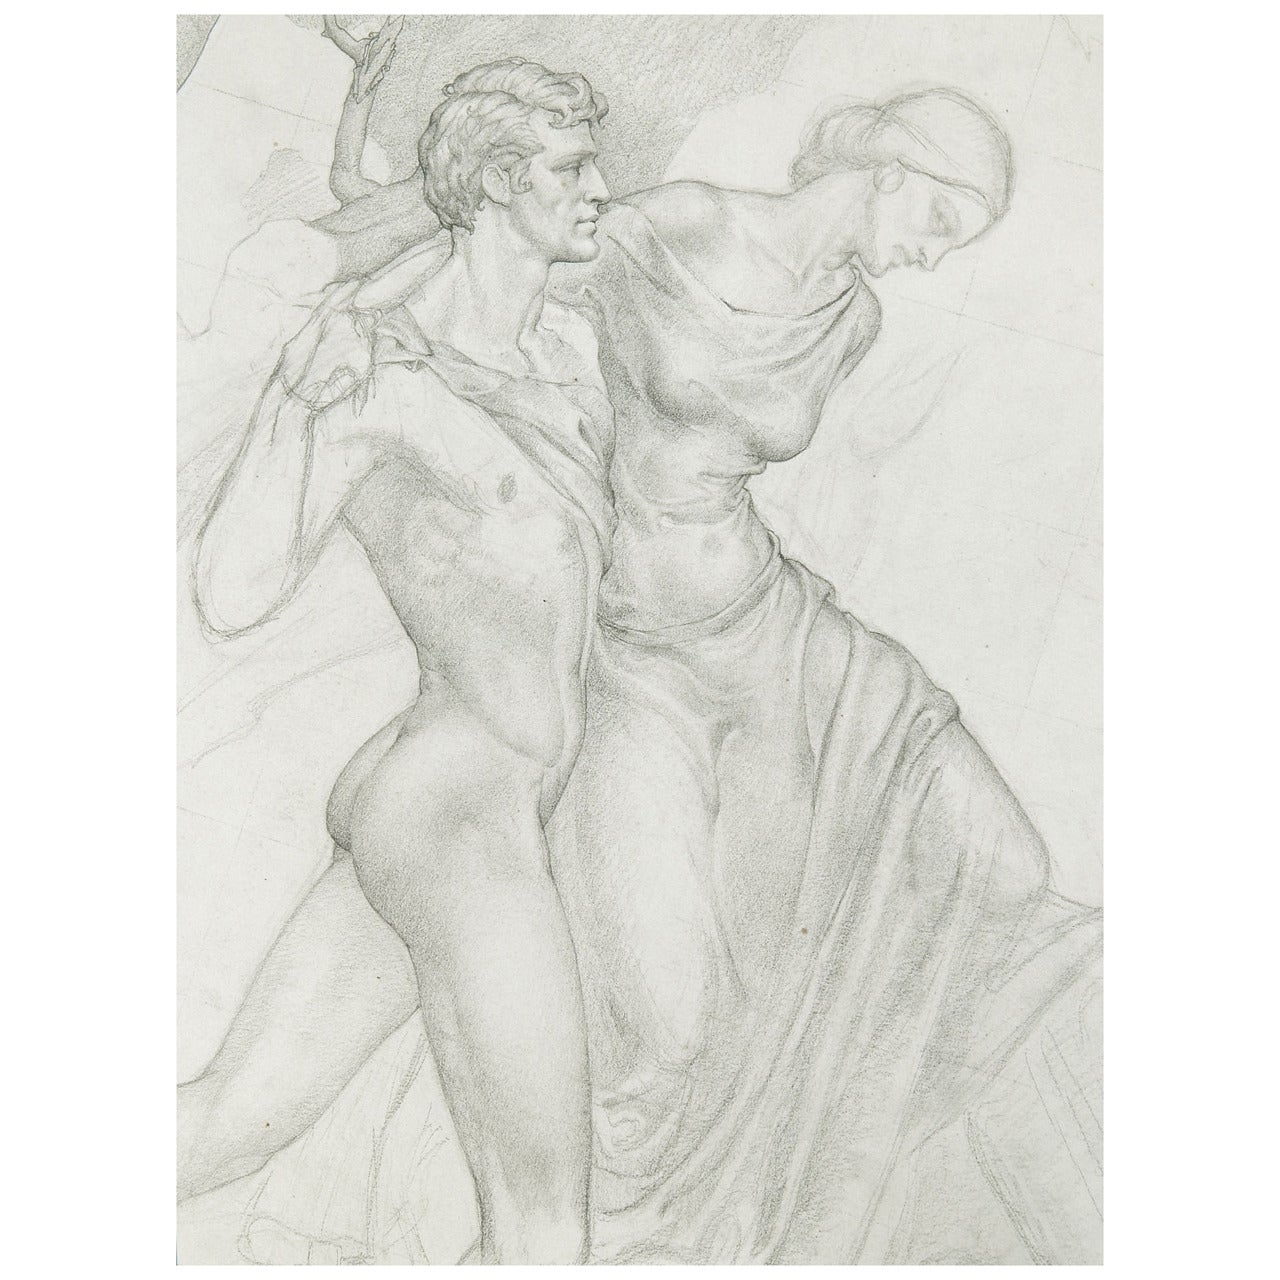 "Nude Male and Draped Female, " Study for Painting by Dunbar Beck